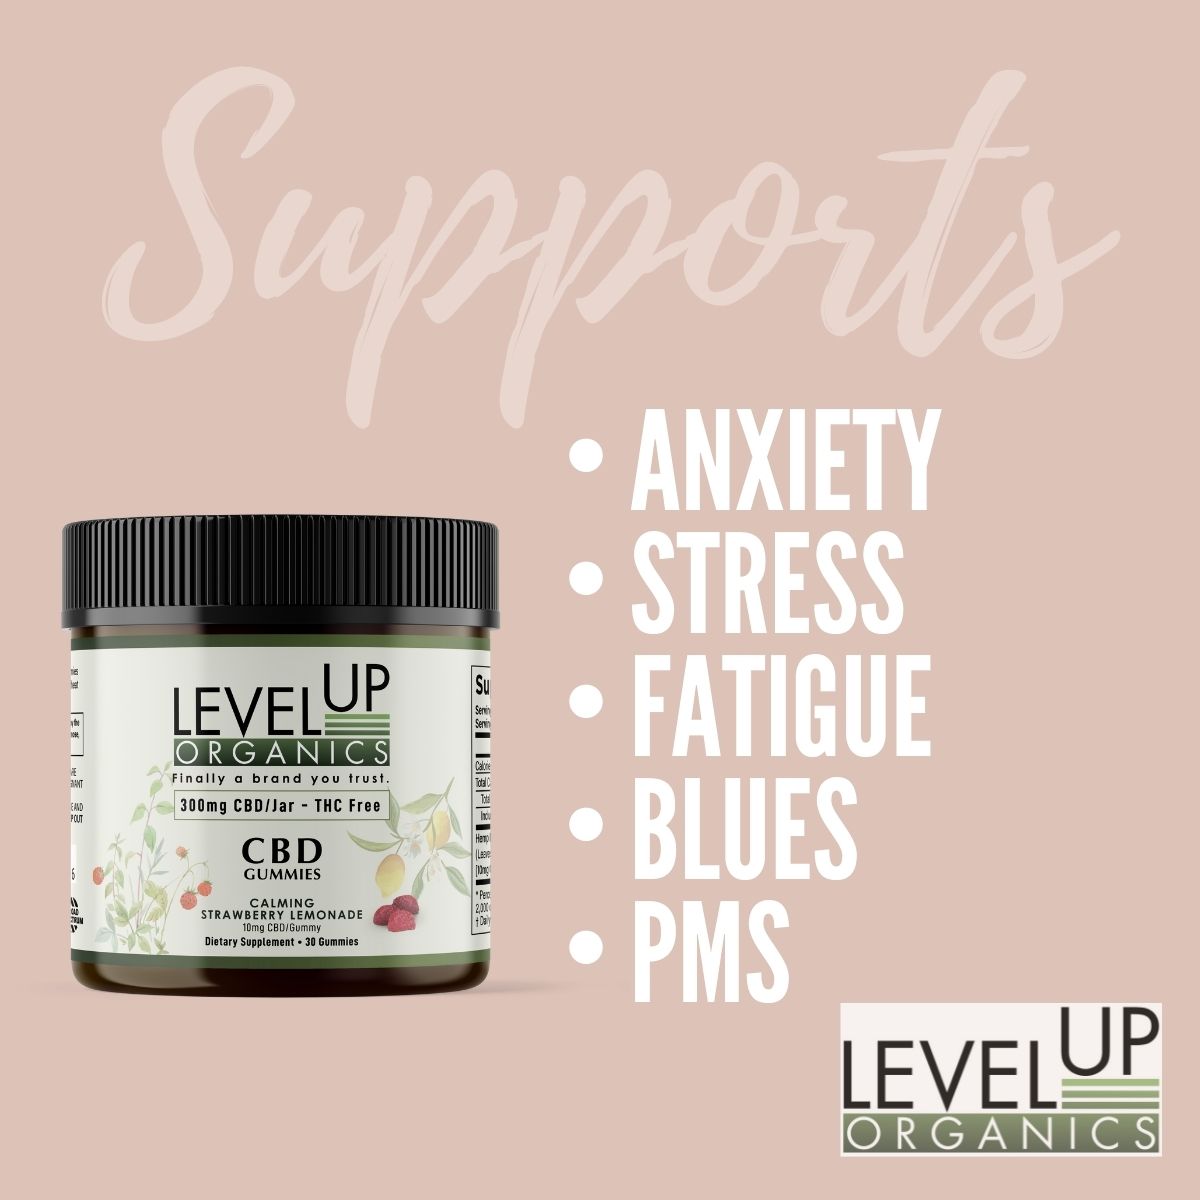 Level Up Organics Supports Anxiety, Stress, Fatigue, Blues, PMS